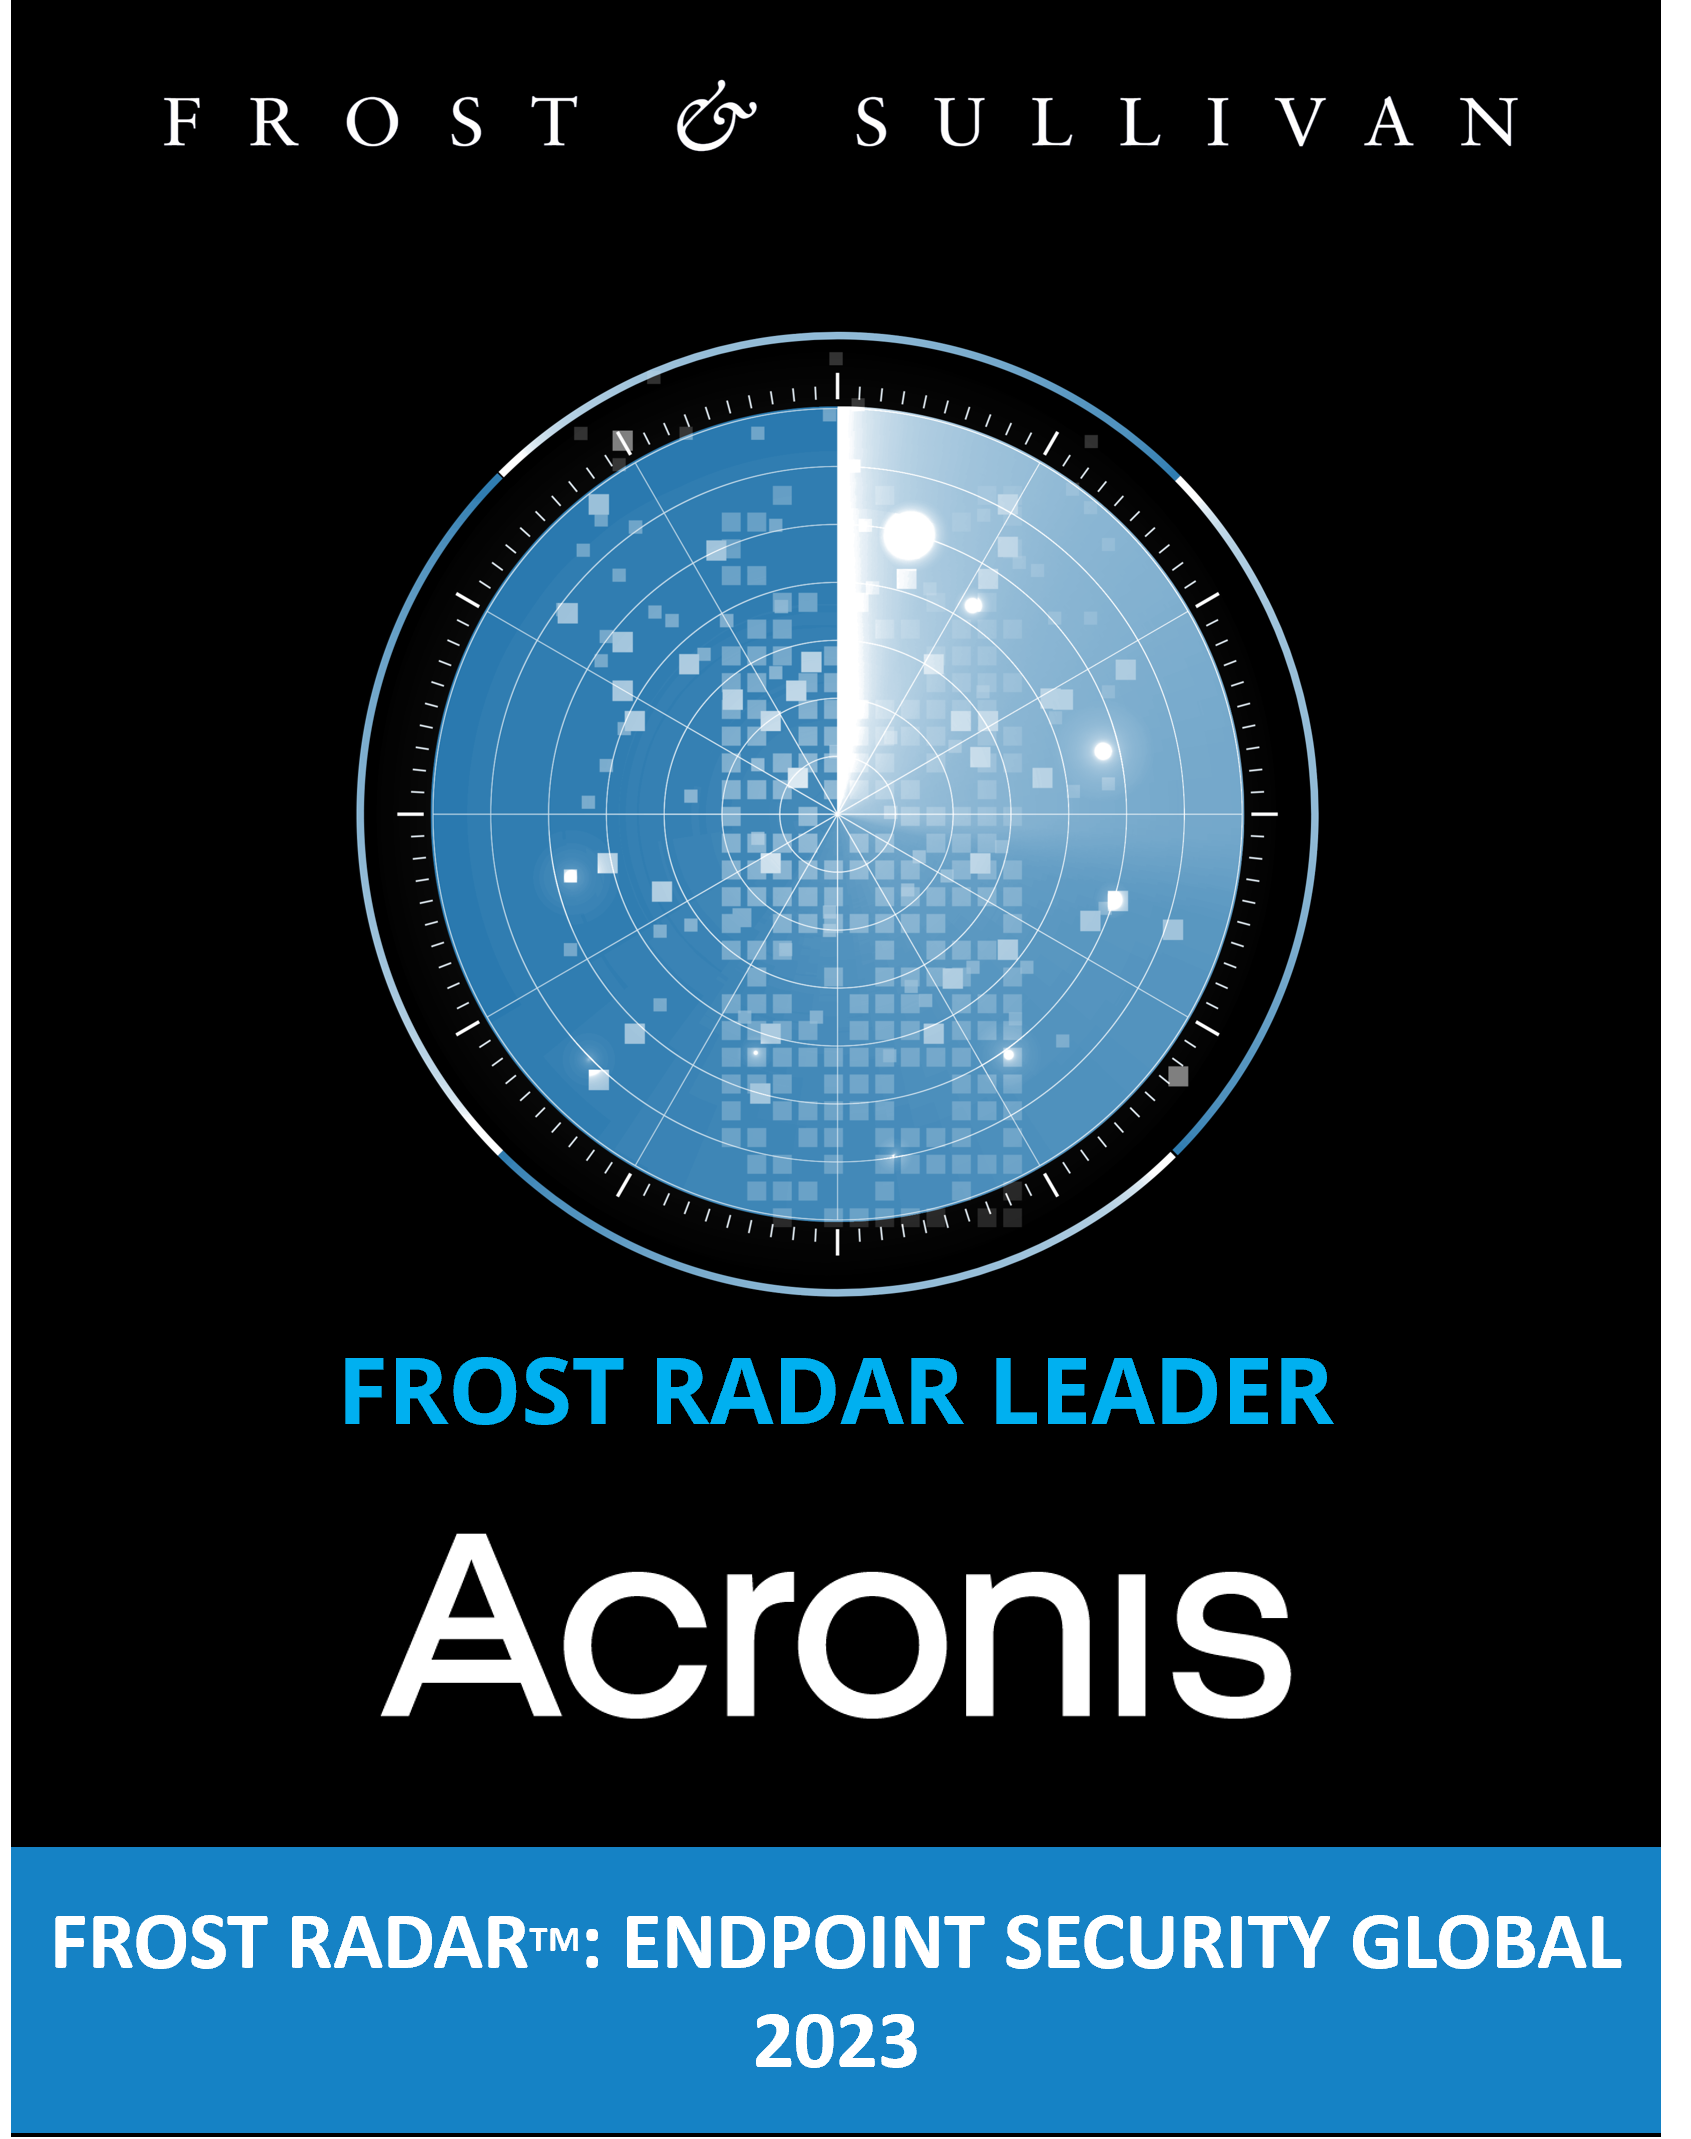 Endpoint Security 2023 Acronis